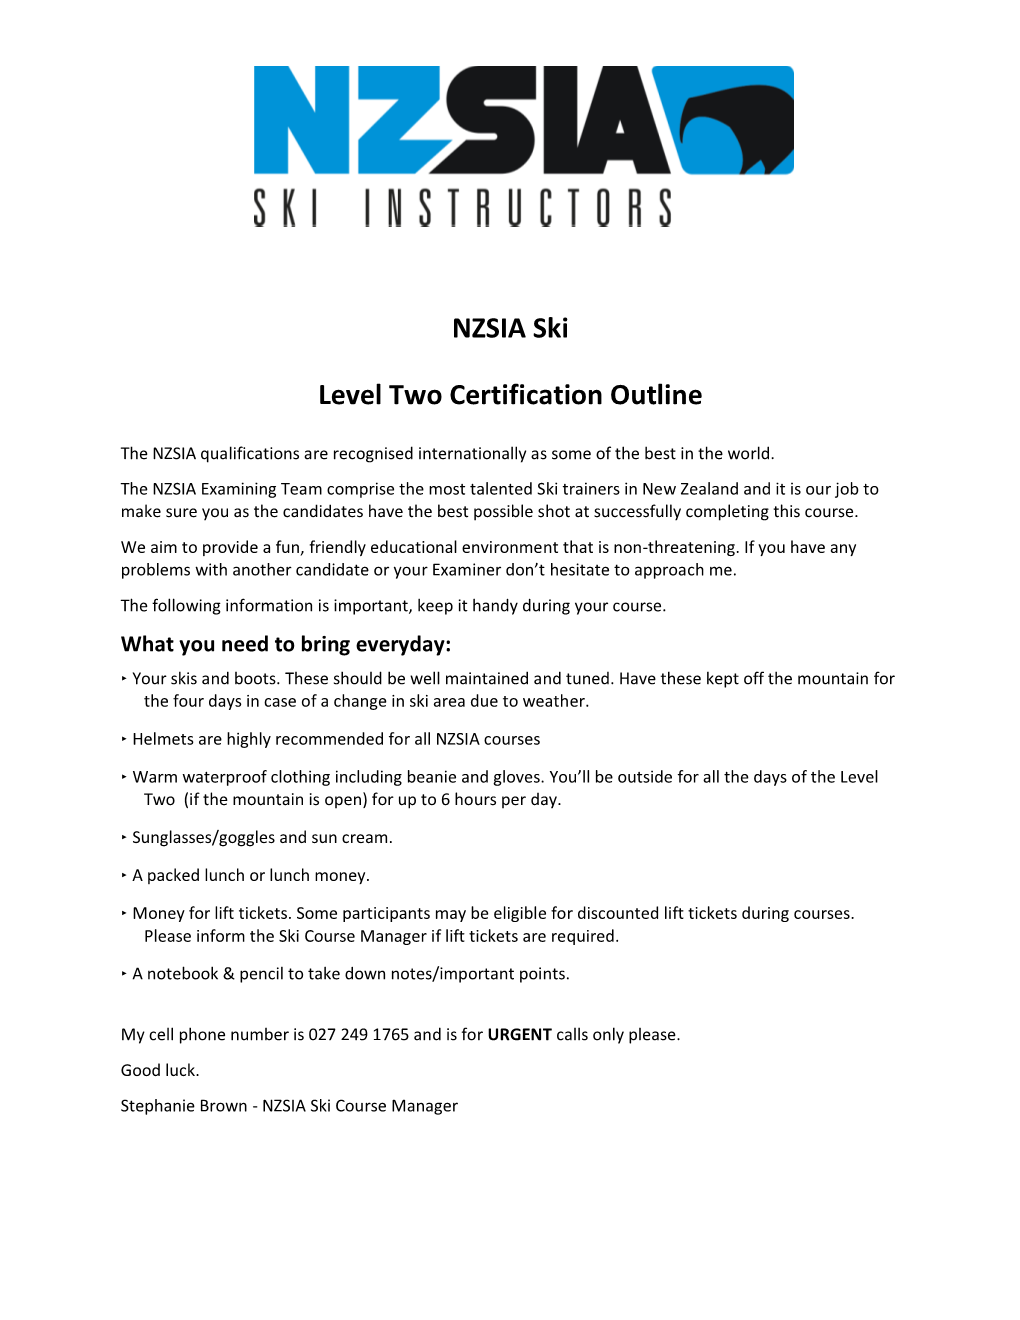 NZSIA Ski Level Two Certification Outline